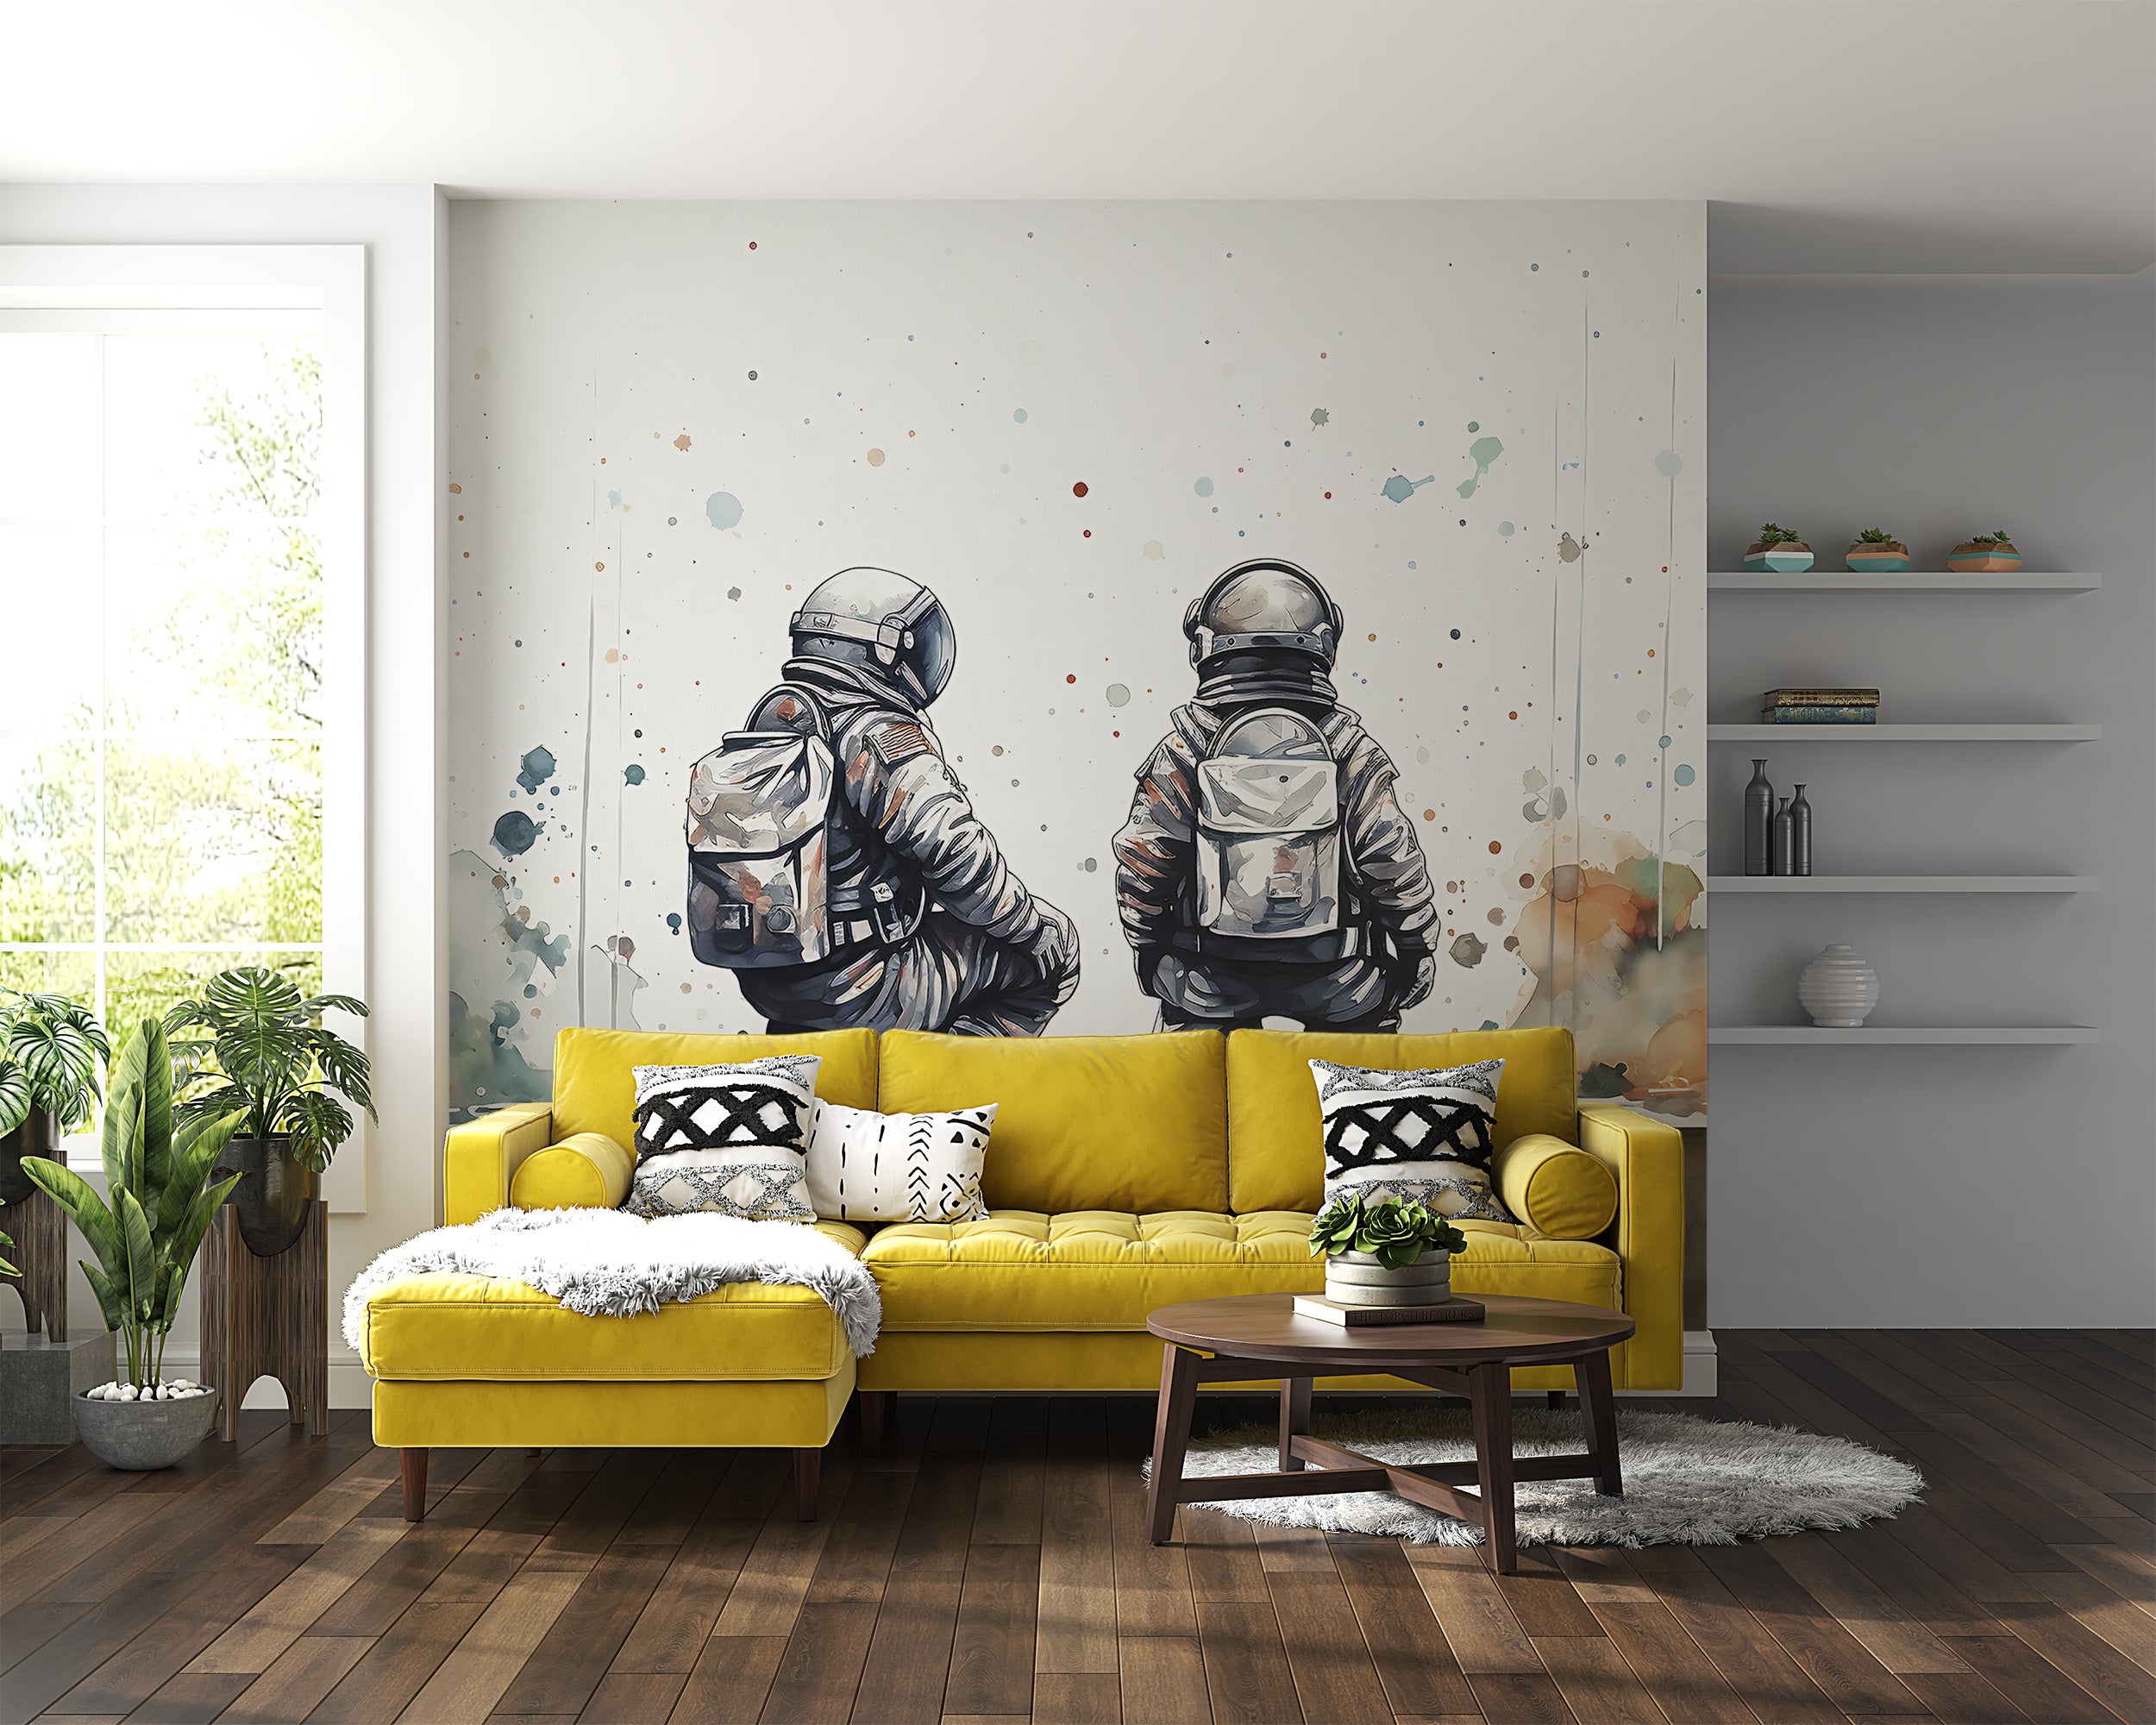 Redefine Kids' Ambiance with Astronauts